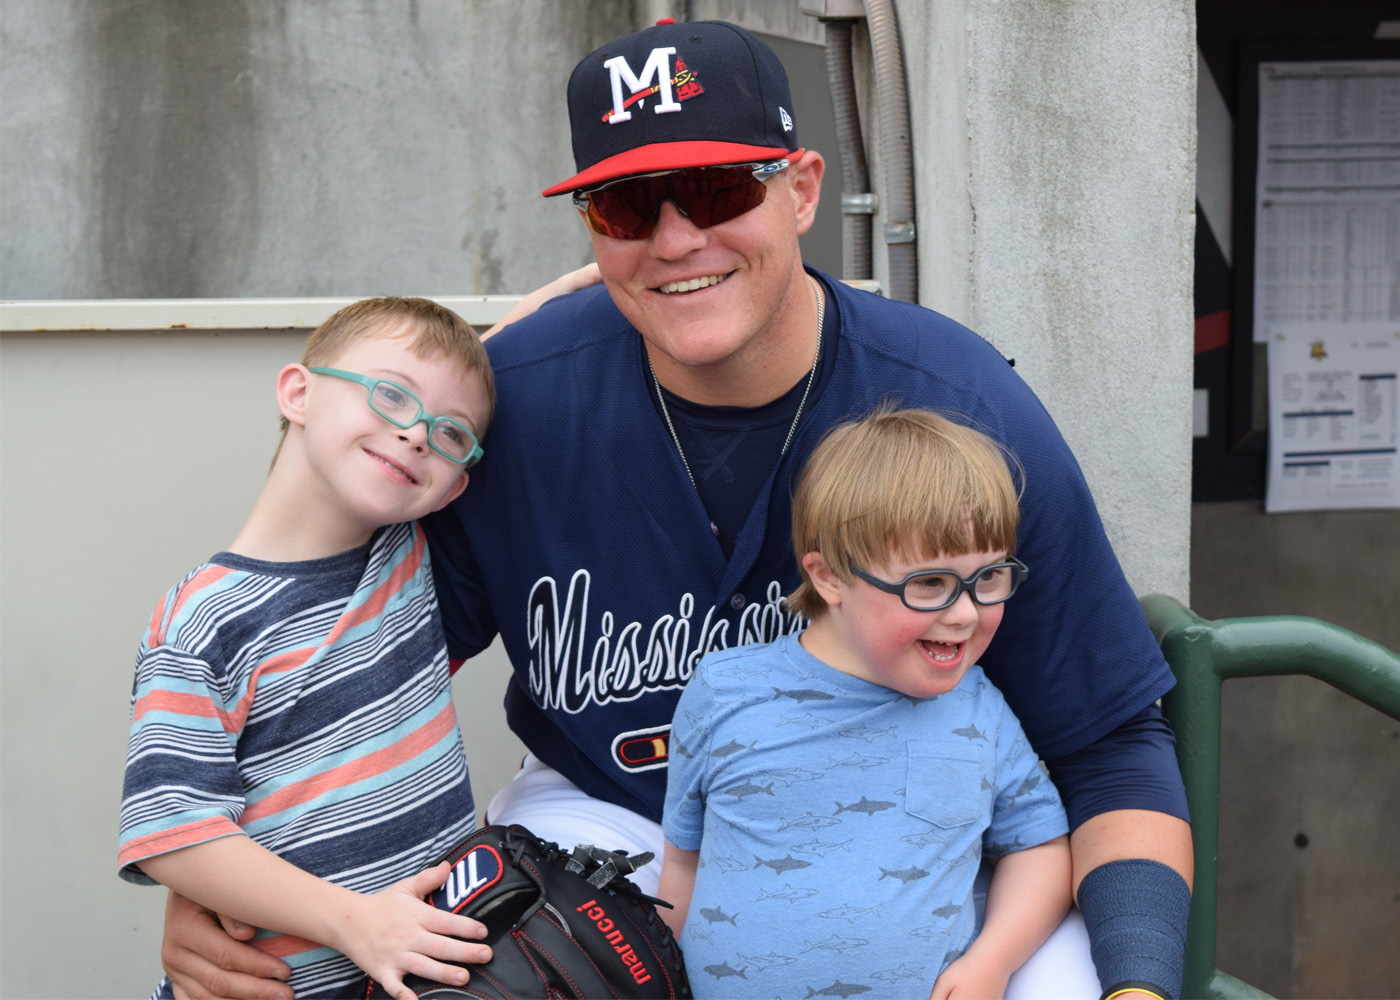 Two children wearing glasses with Down syndrome pose with an older baseball pitcher in front of a dugout.